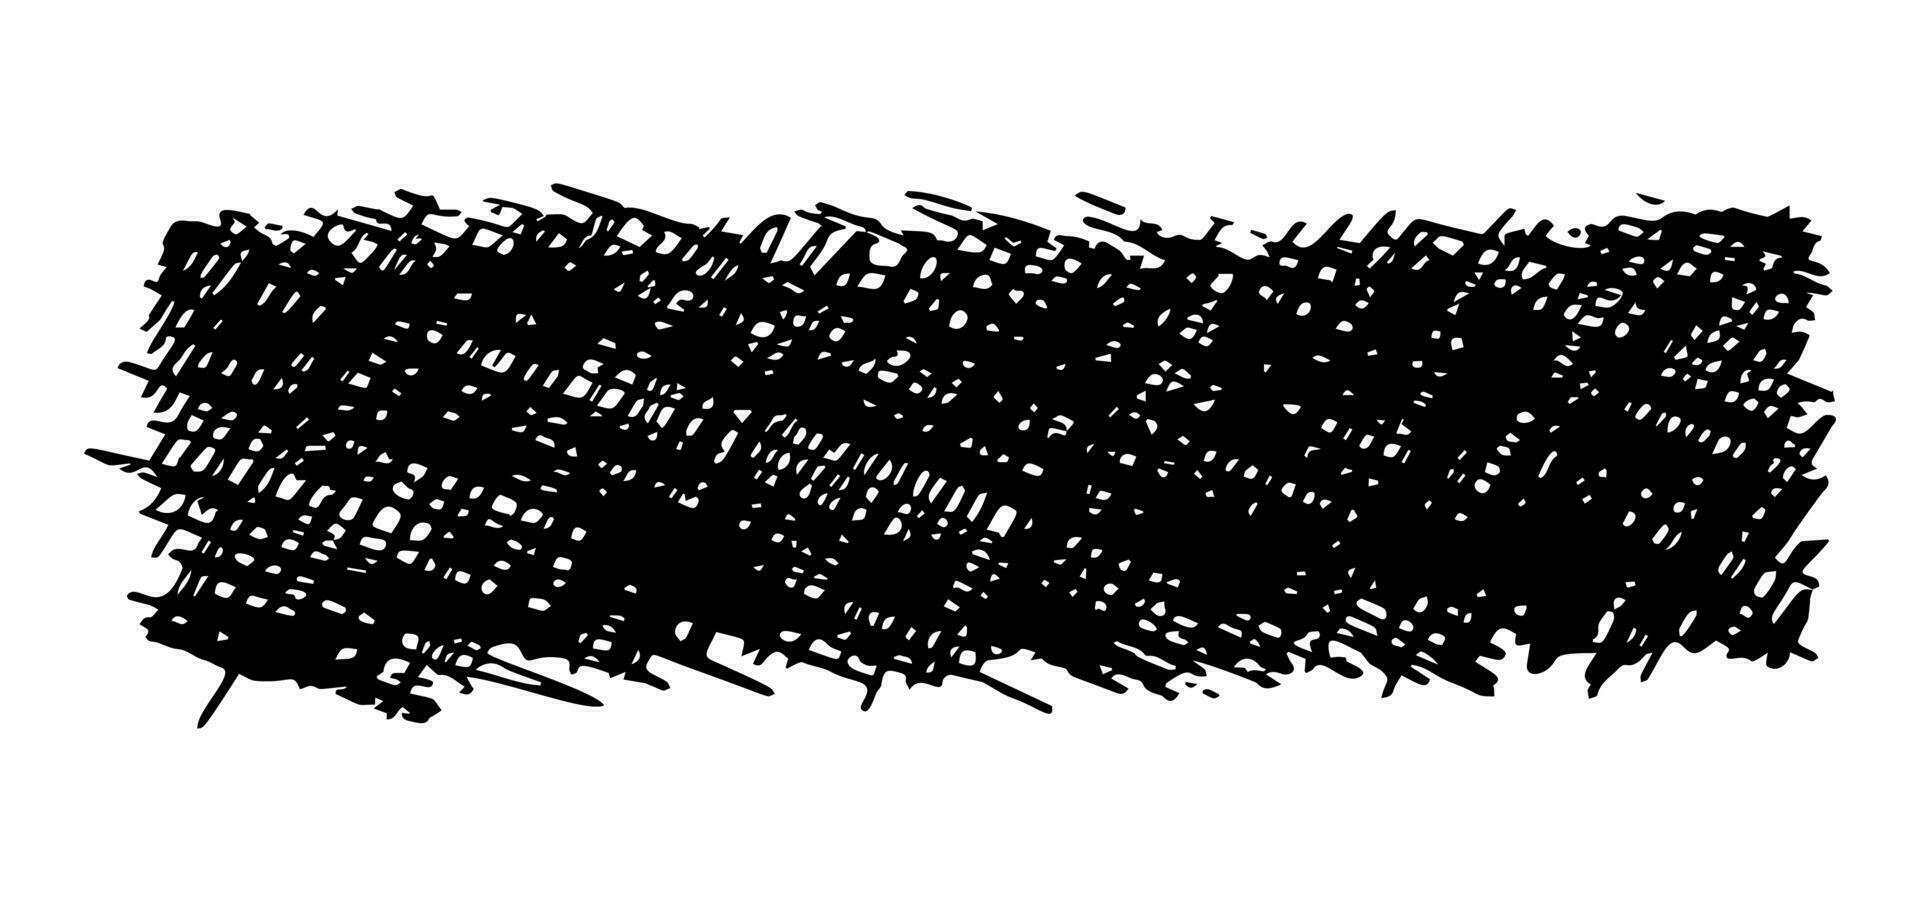 Sketch scribble smear. Black pencil drawing in the shape of a rectangle on white background. Great design for any purposes. Vector illustration.